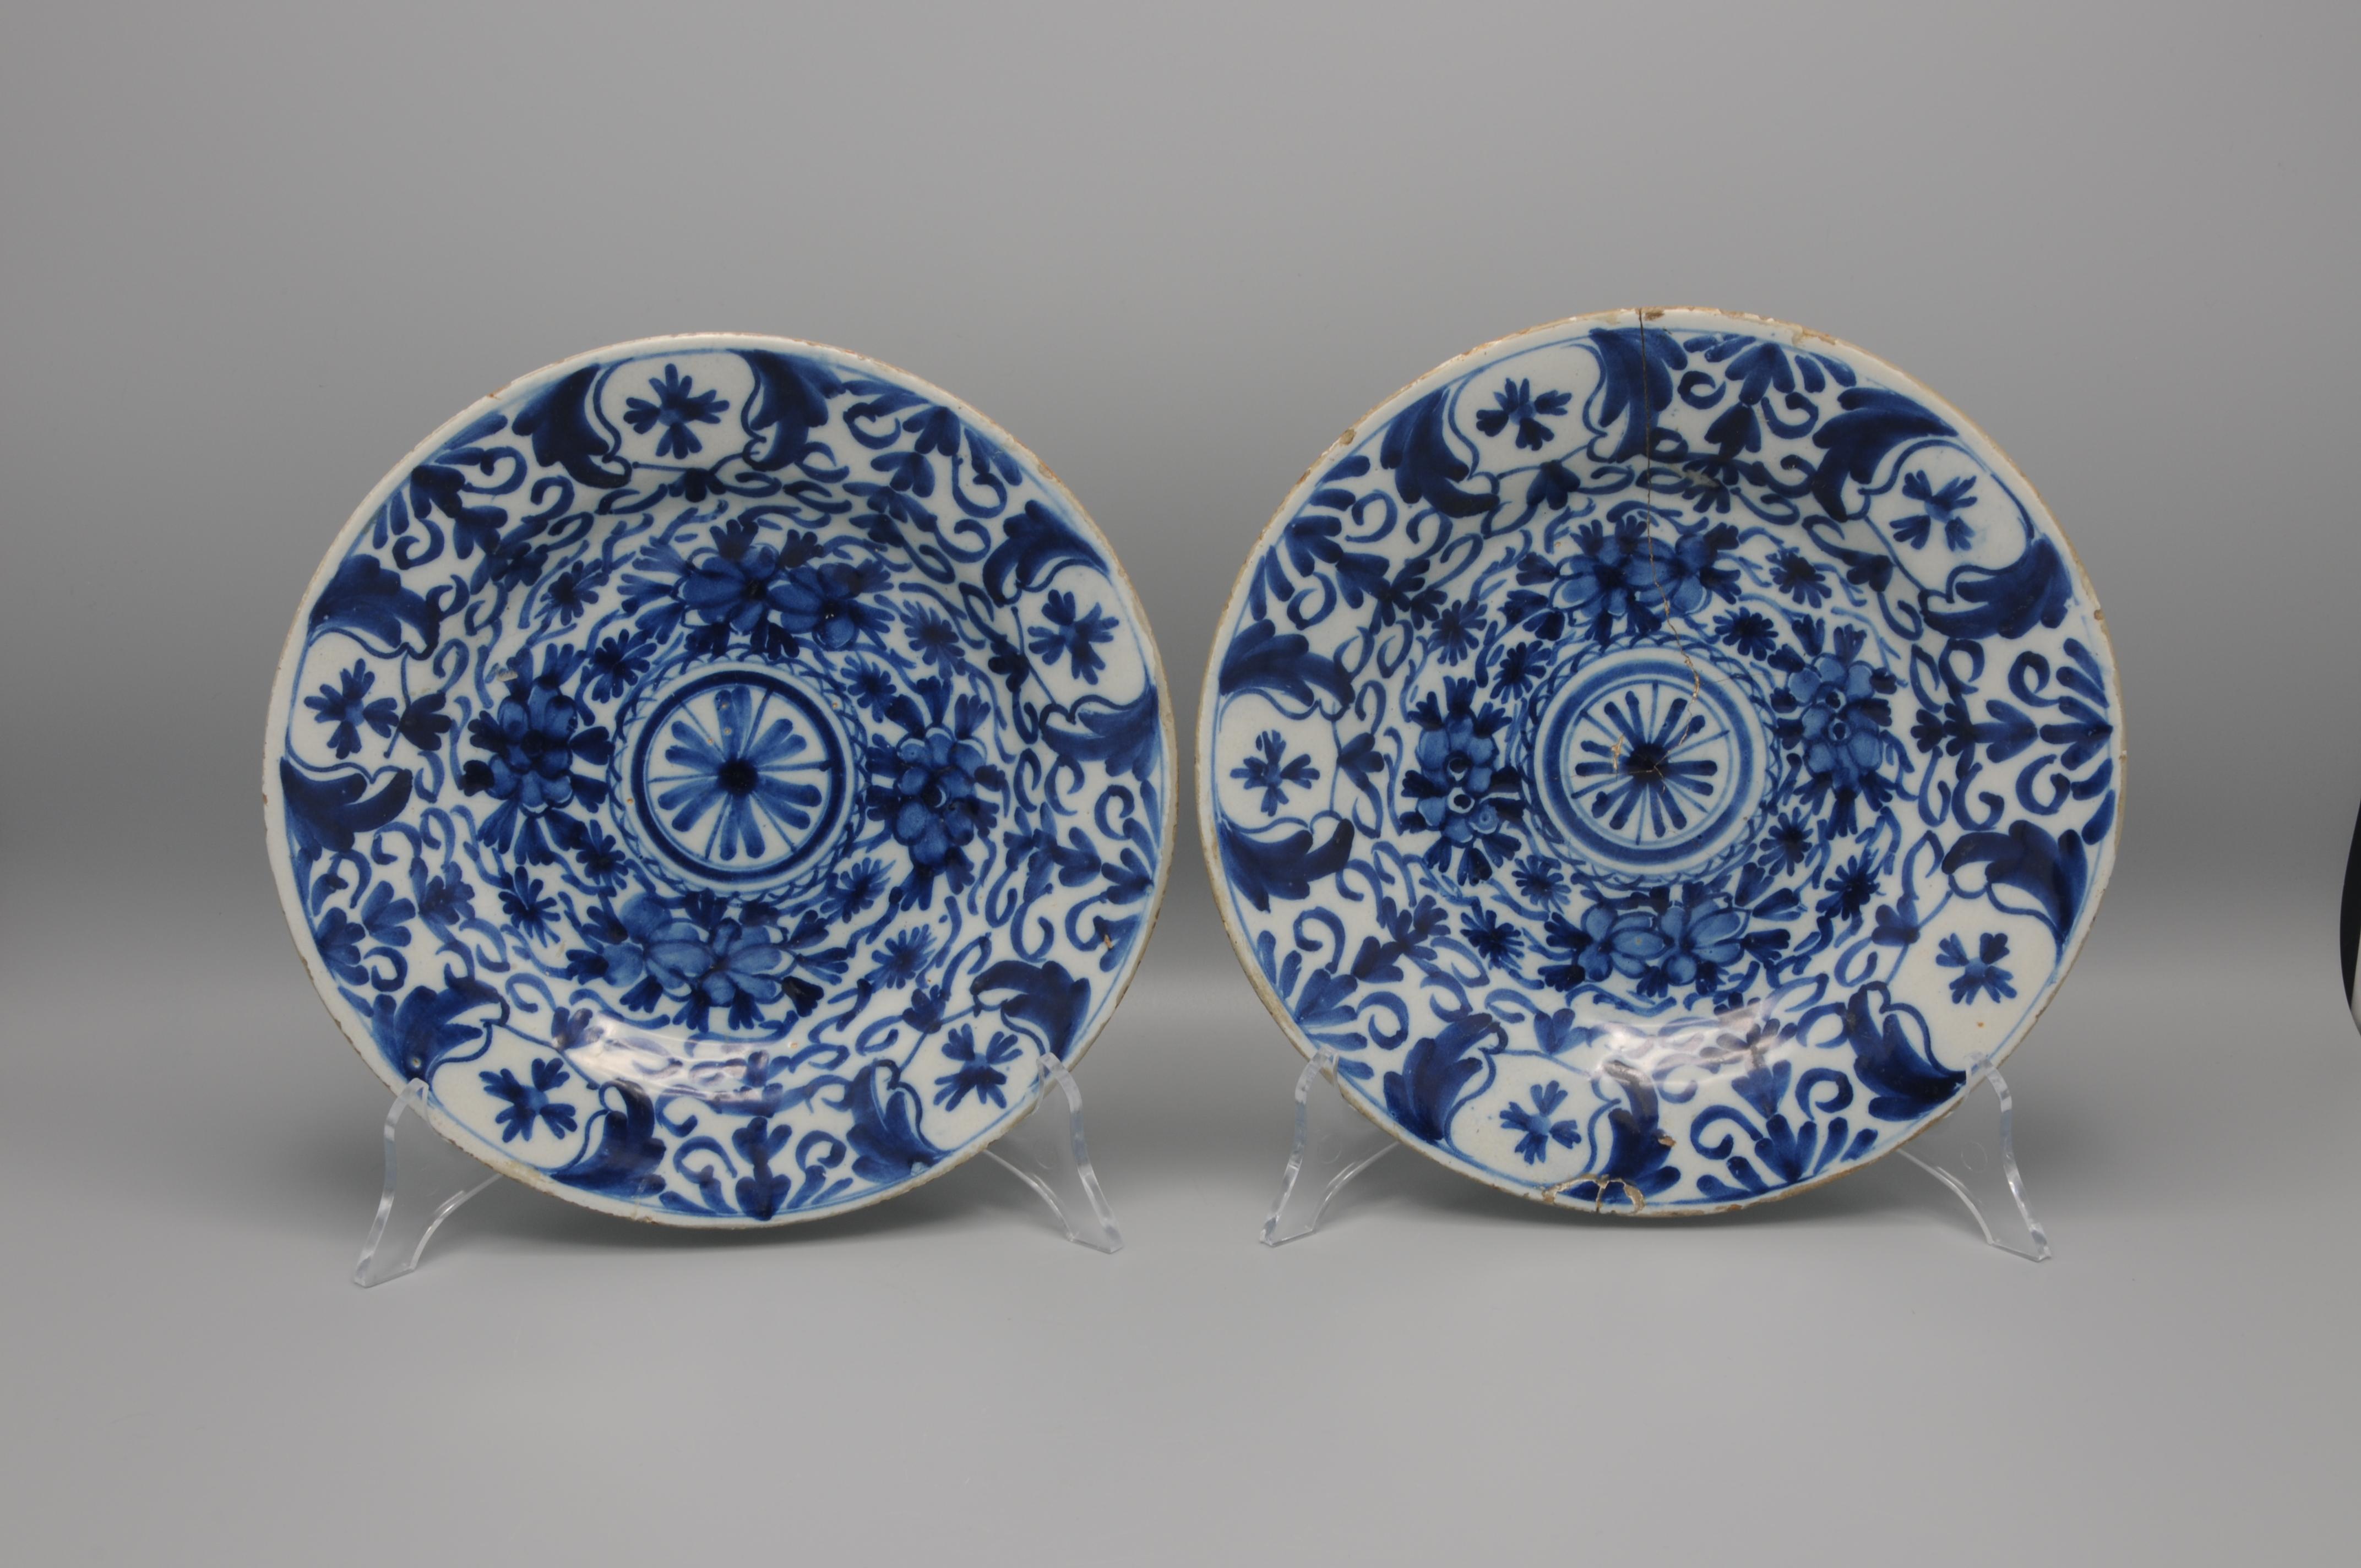 Pair of late 18th century Delftware plates with 'boerendelft' decoration.
Border adorned with foliage scrolls. 

unmarked
Condition: One in good condition, other with hairline and restored chip. 